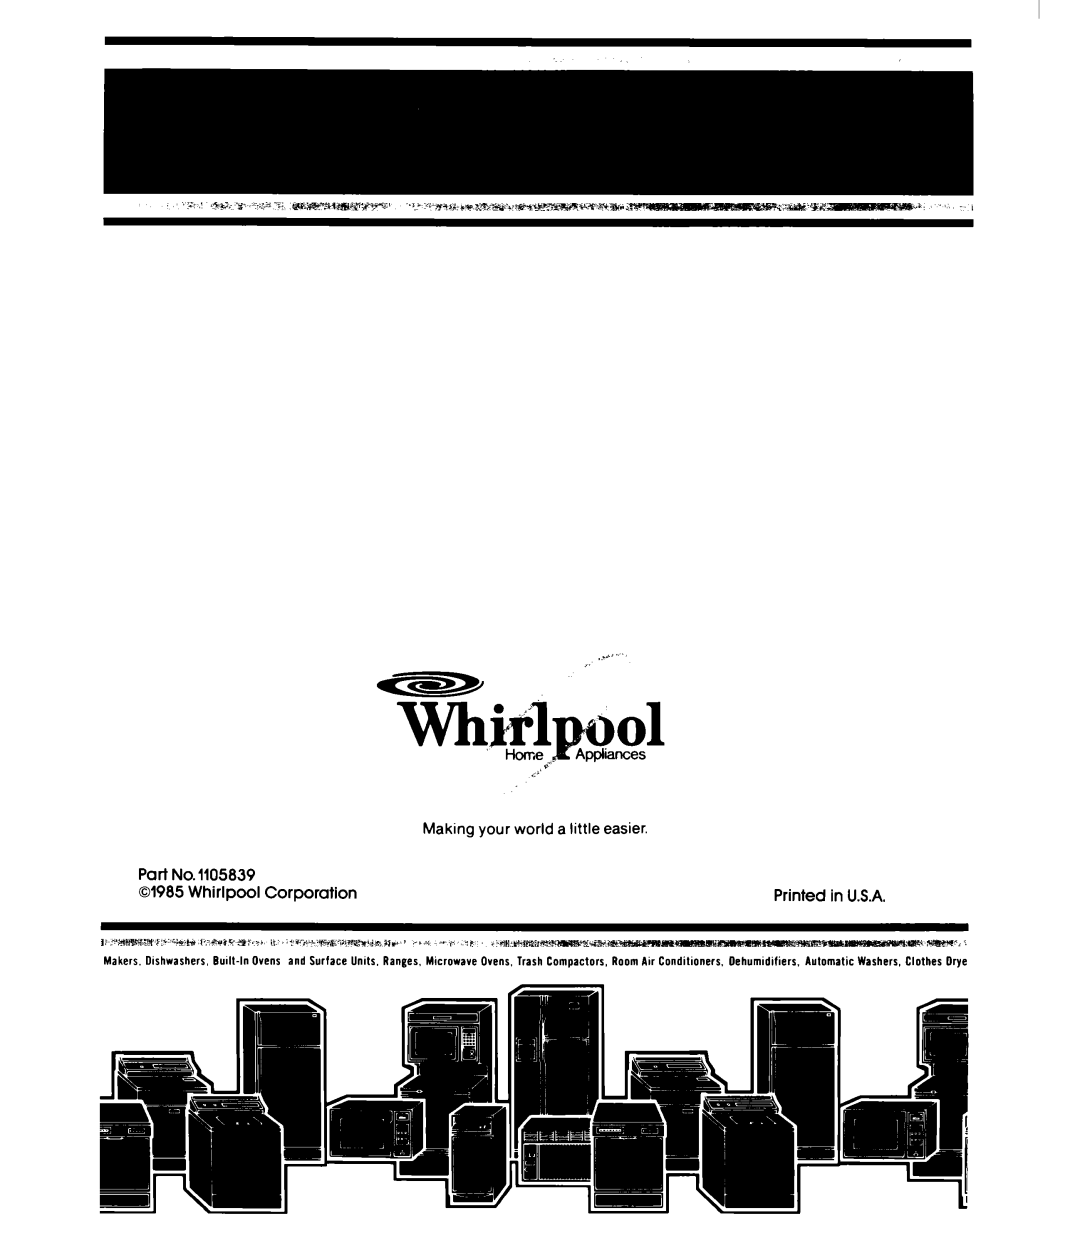 Whirlpool ETl4EP manual Part, Whirlpool, Corporation, Printed, in U.S.A, Making your world a little easier 